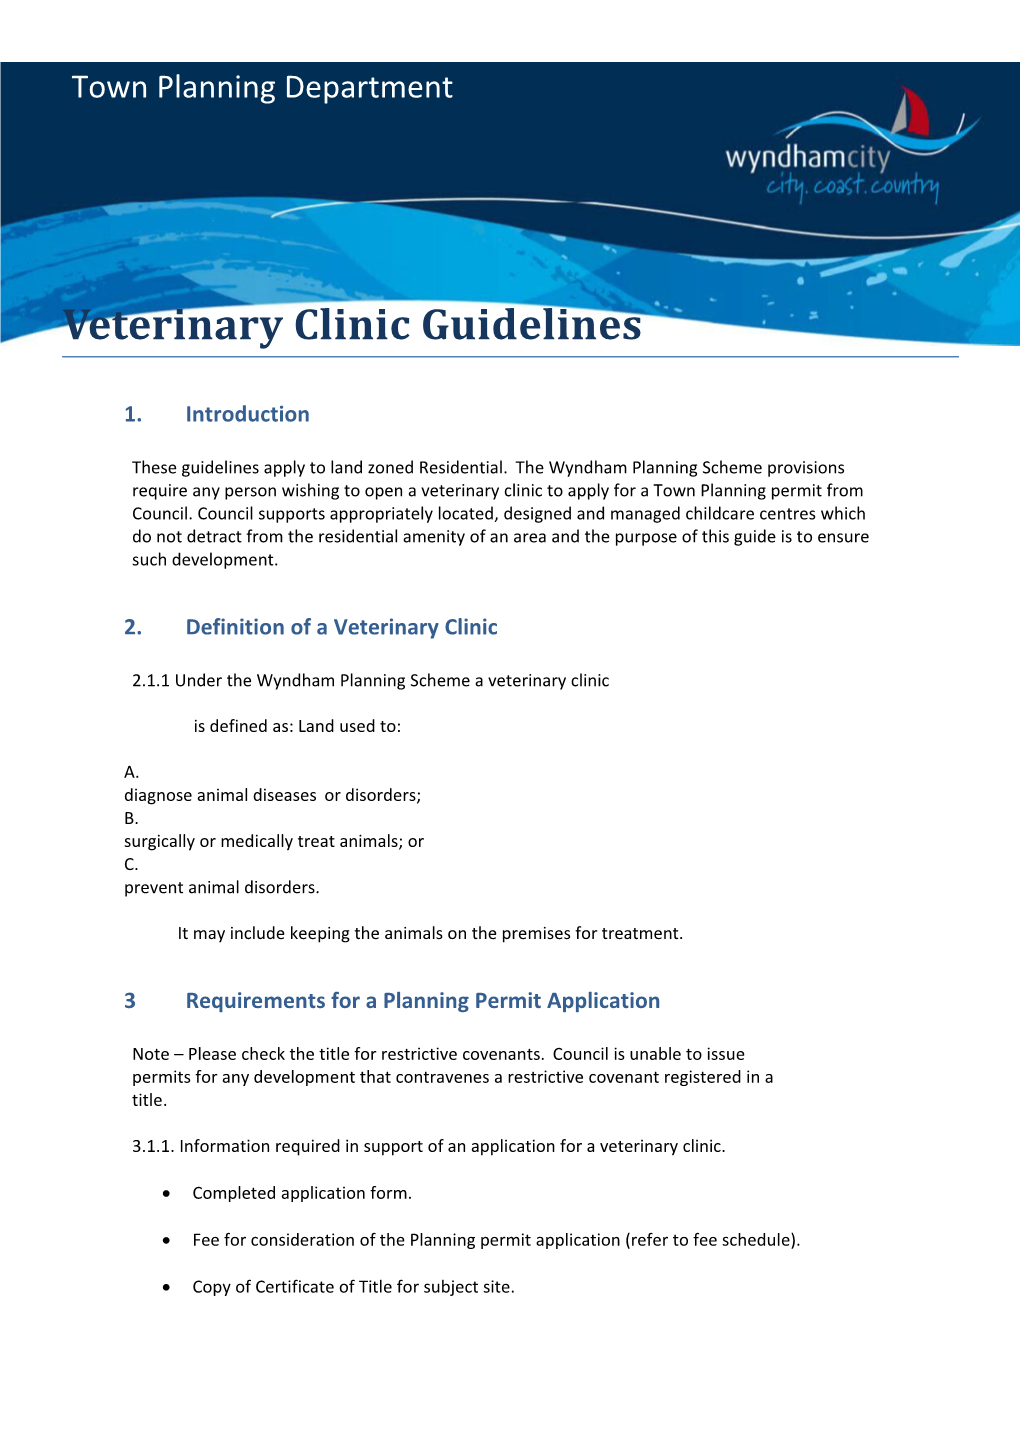 Guidelines - Veterinary Clinic